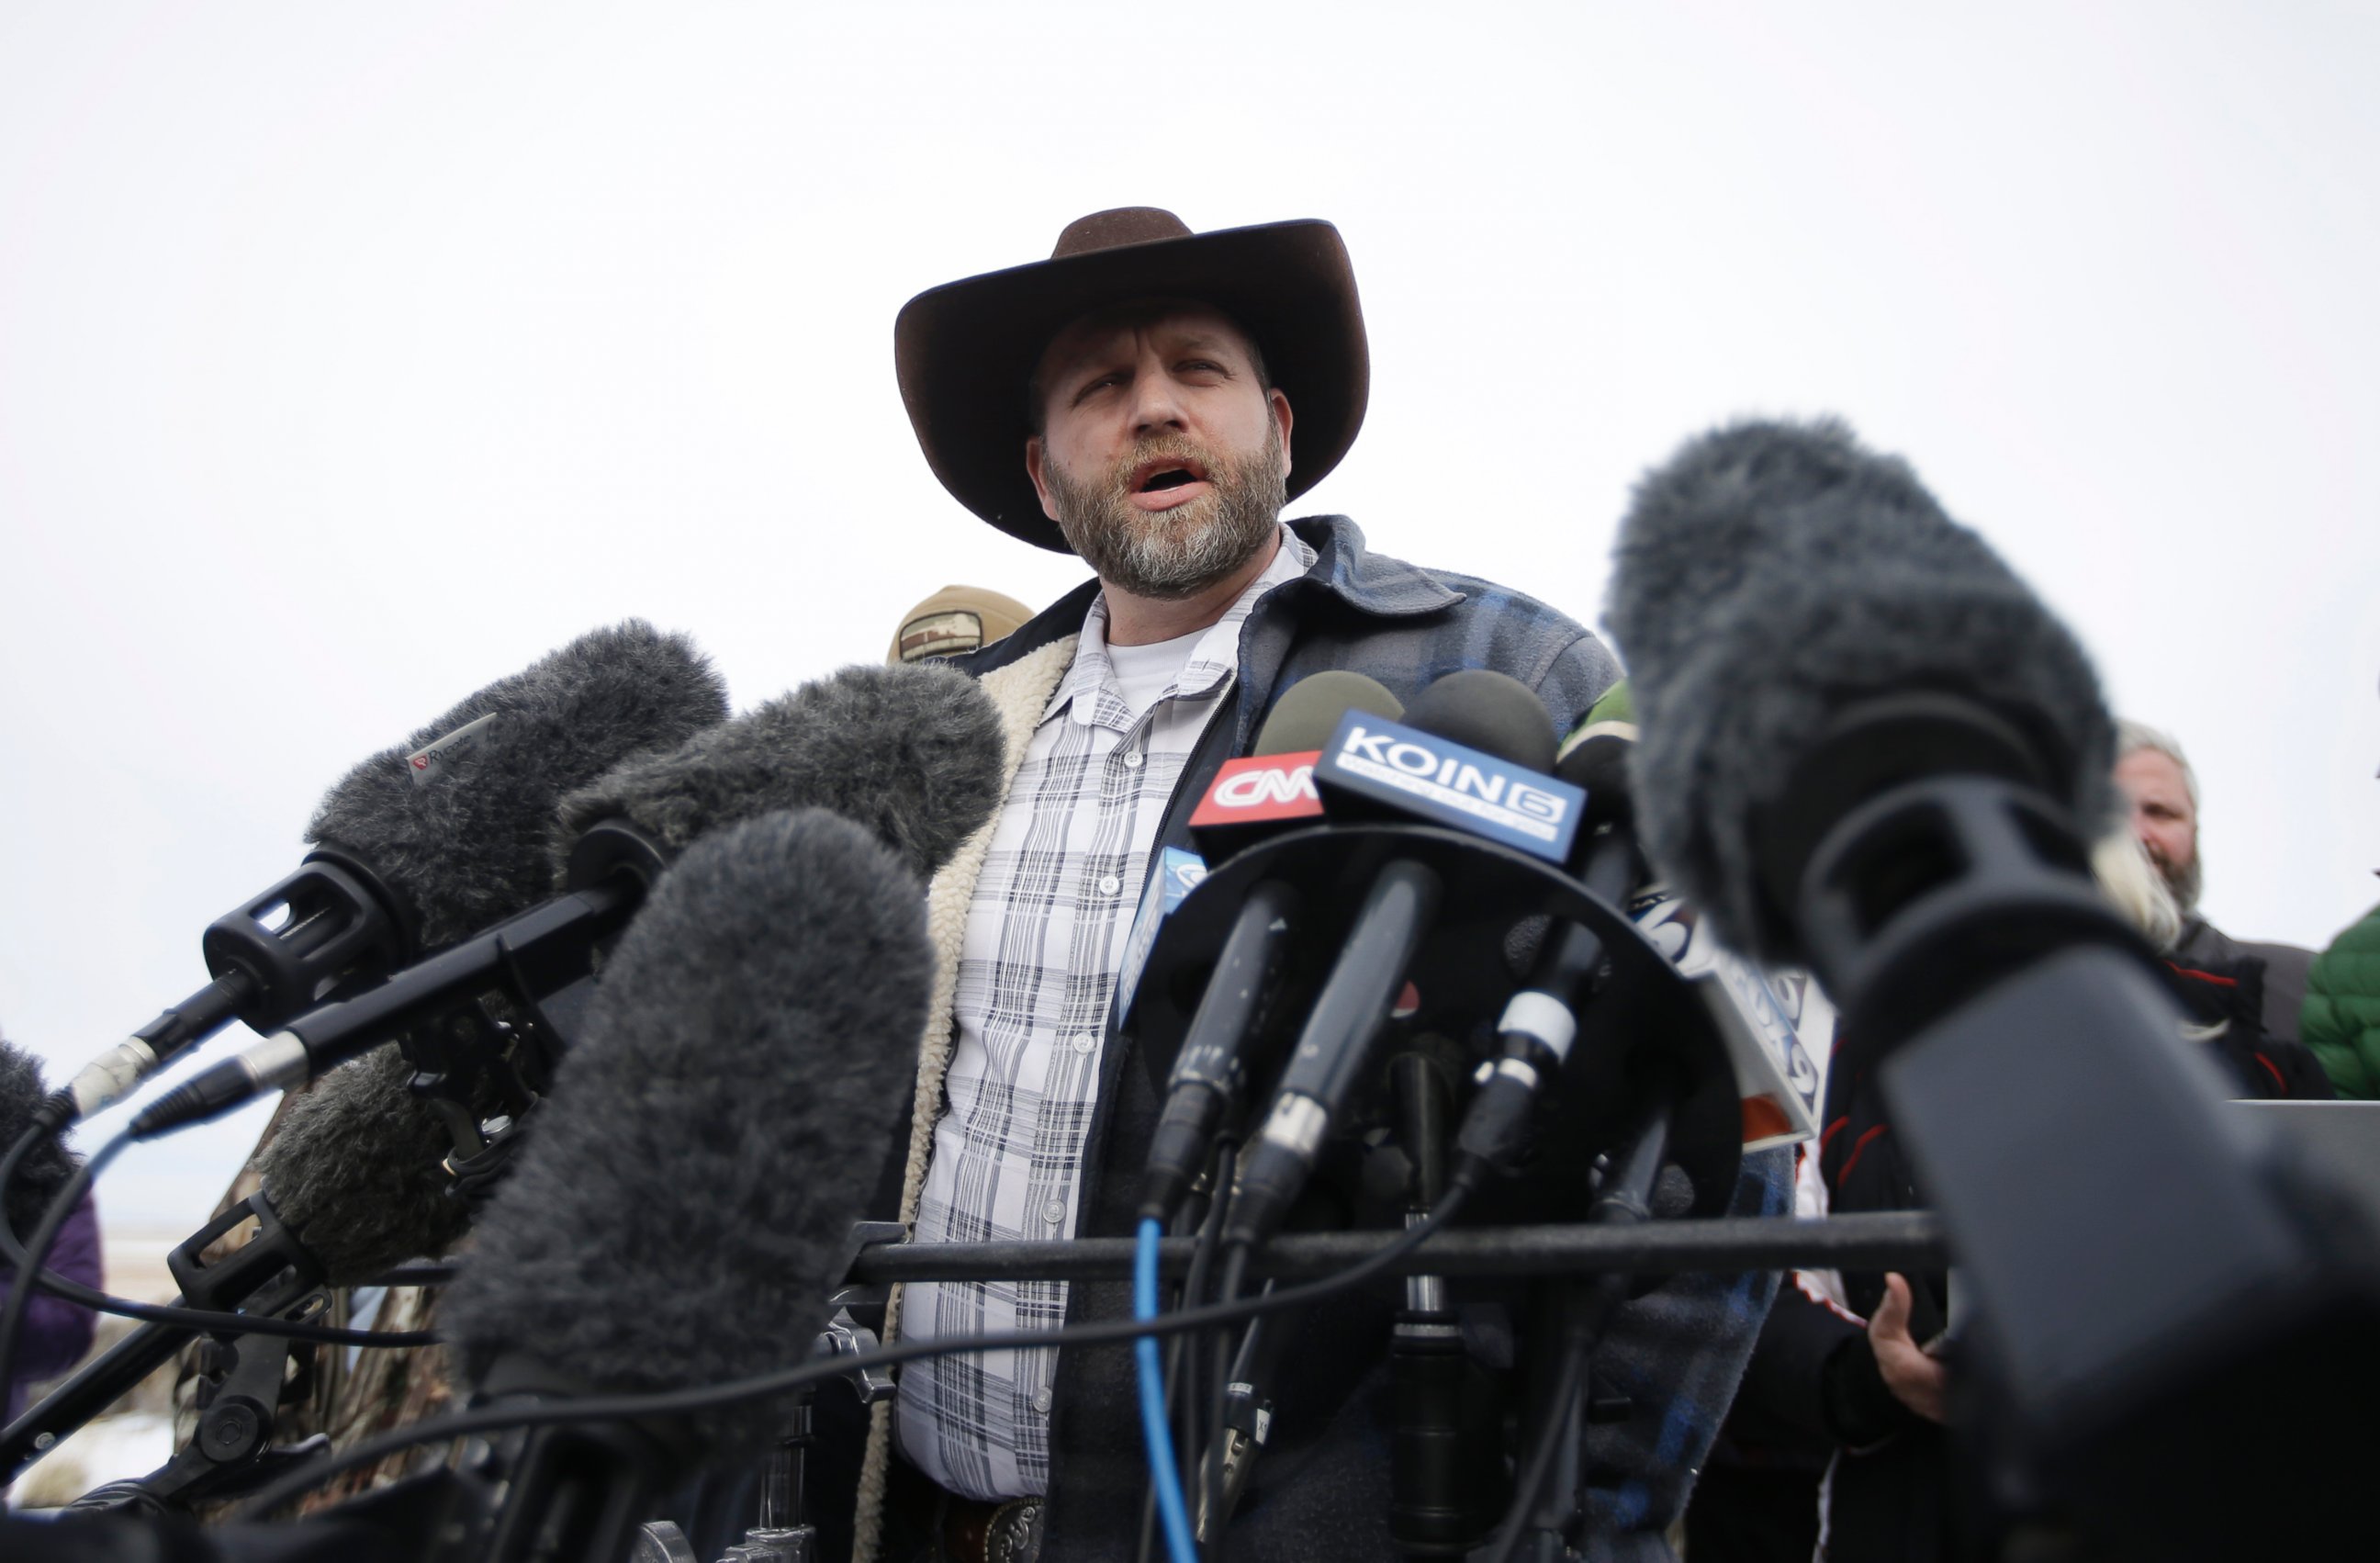 PHOTO: Ammon Bundy, one of the sons of Nevada rancher Cliven Bundy, speaks with reporters during a news conference at Malheur National Wildlife Refuge headquarters, Jan. 4, 2016, near Burns, Ore.